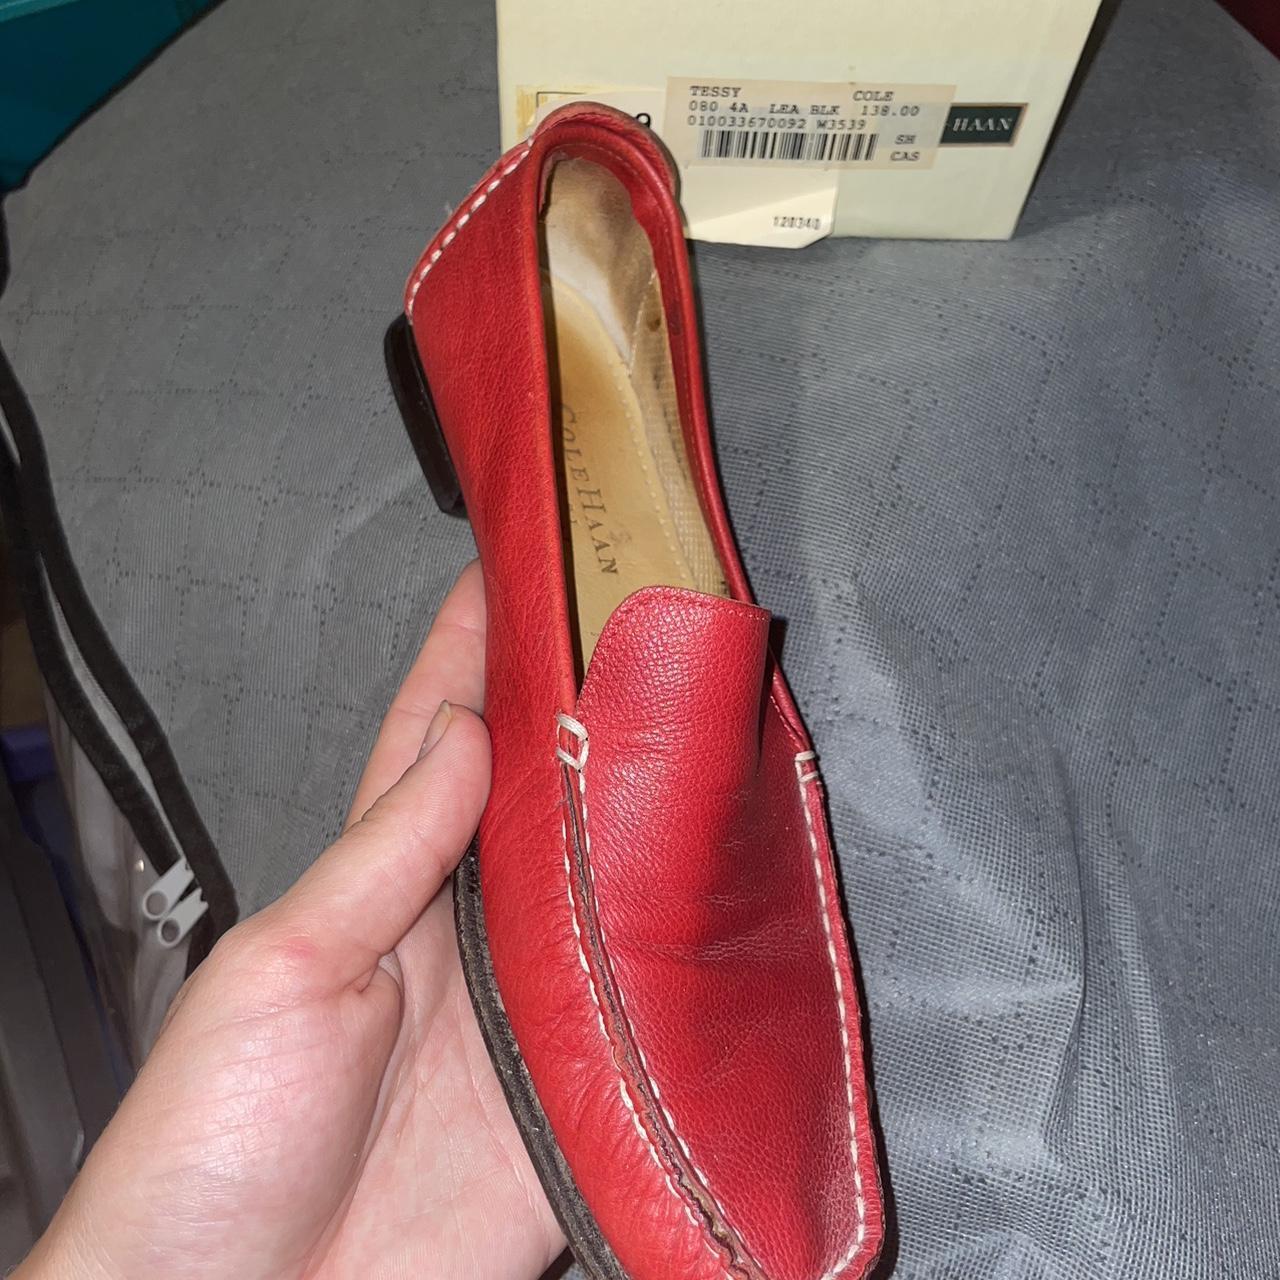 Women's Red Loafers & Oxfords